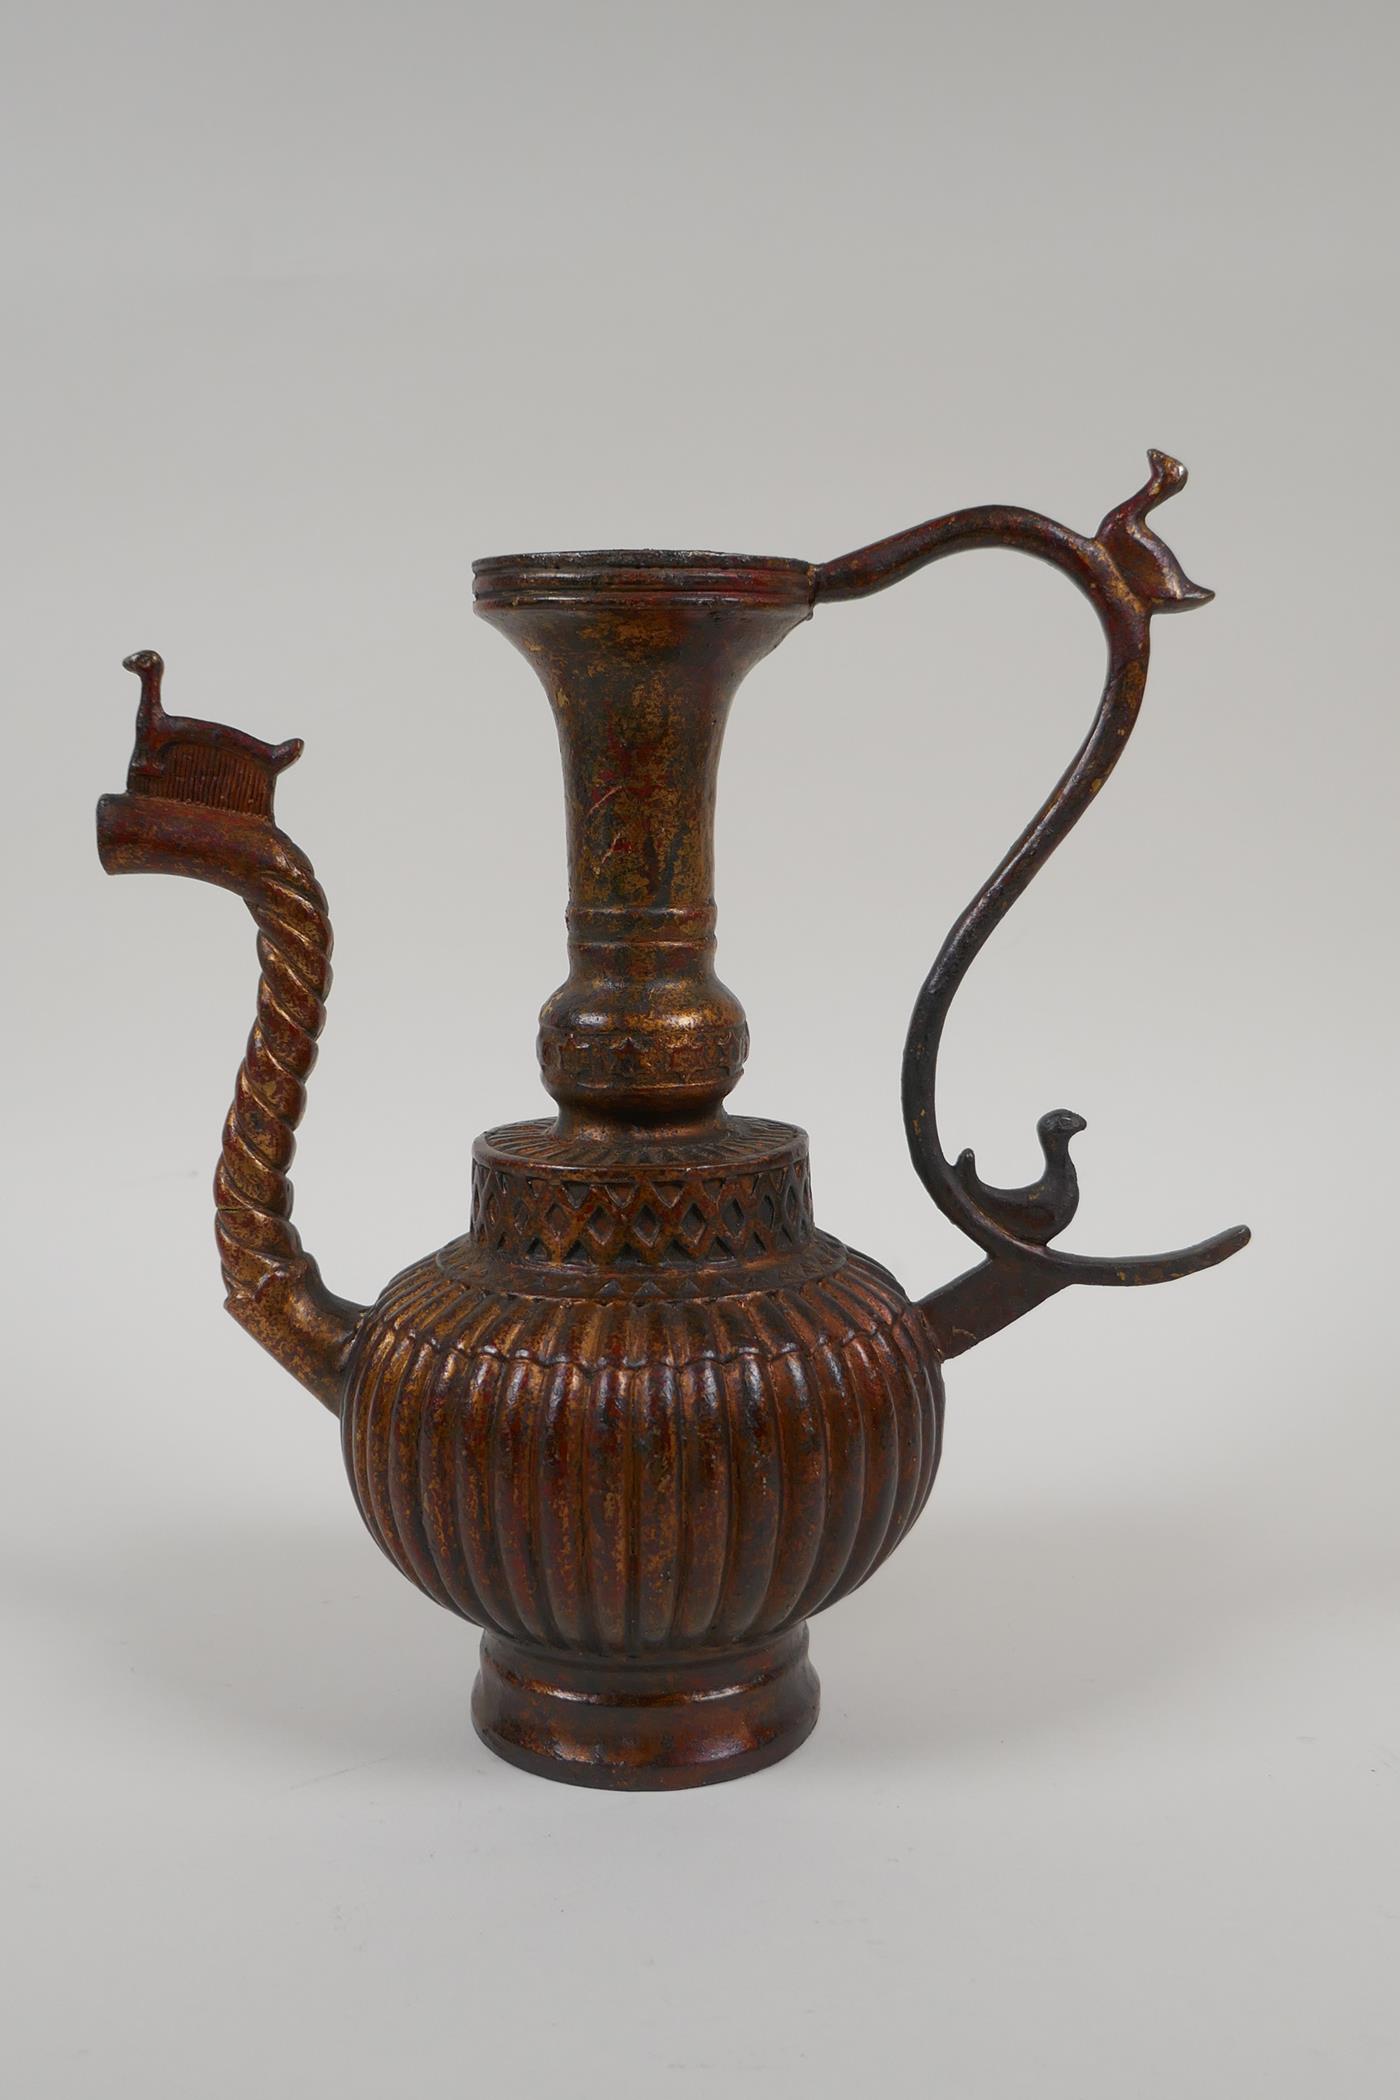 An Islamic gilt bronze ewer with a ribbed body, 9" high, spout AF